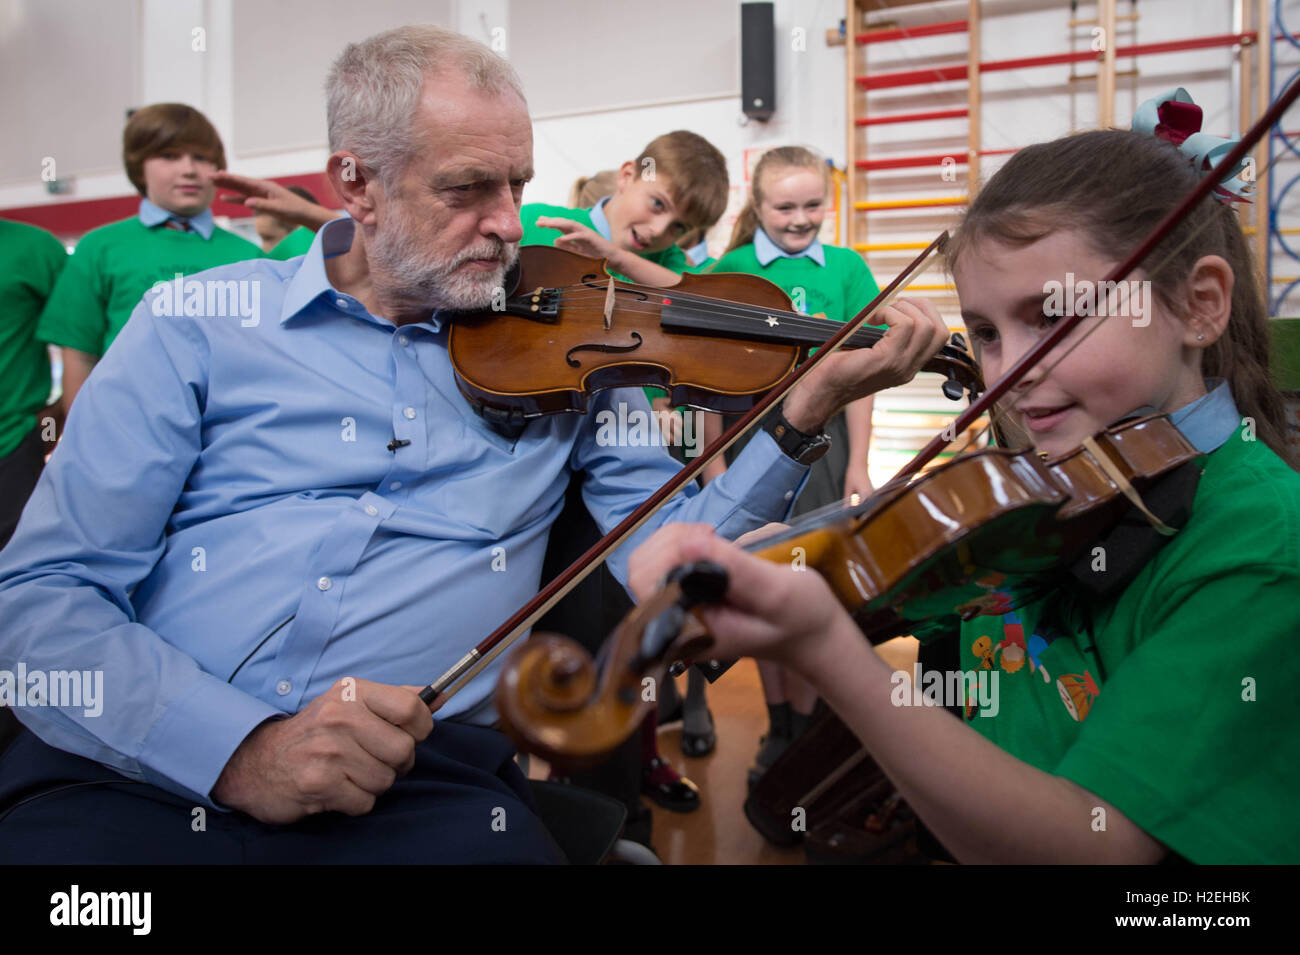 Labour leader Jeremy Corbyn is given a violin lesson by 10 year old Jessica Kelly during a visit to Faith Primary School in Liverpool, where he met children taking part in the In Harmony project, which is supported by the Royal Liverpool Philharmonic Orchestra and is helping school children learn to play musical instruments. Stock Photo